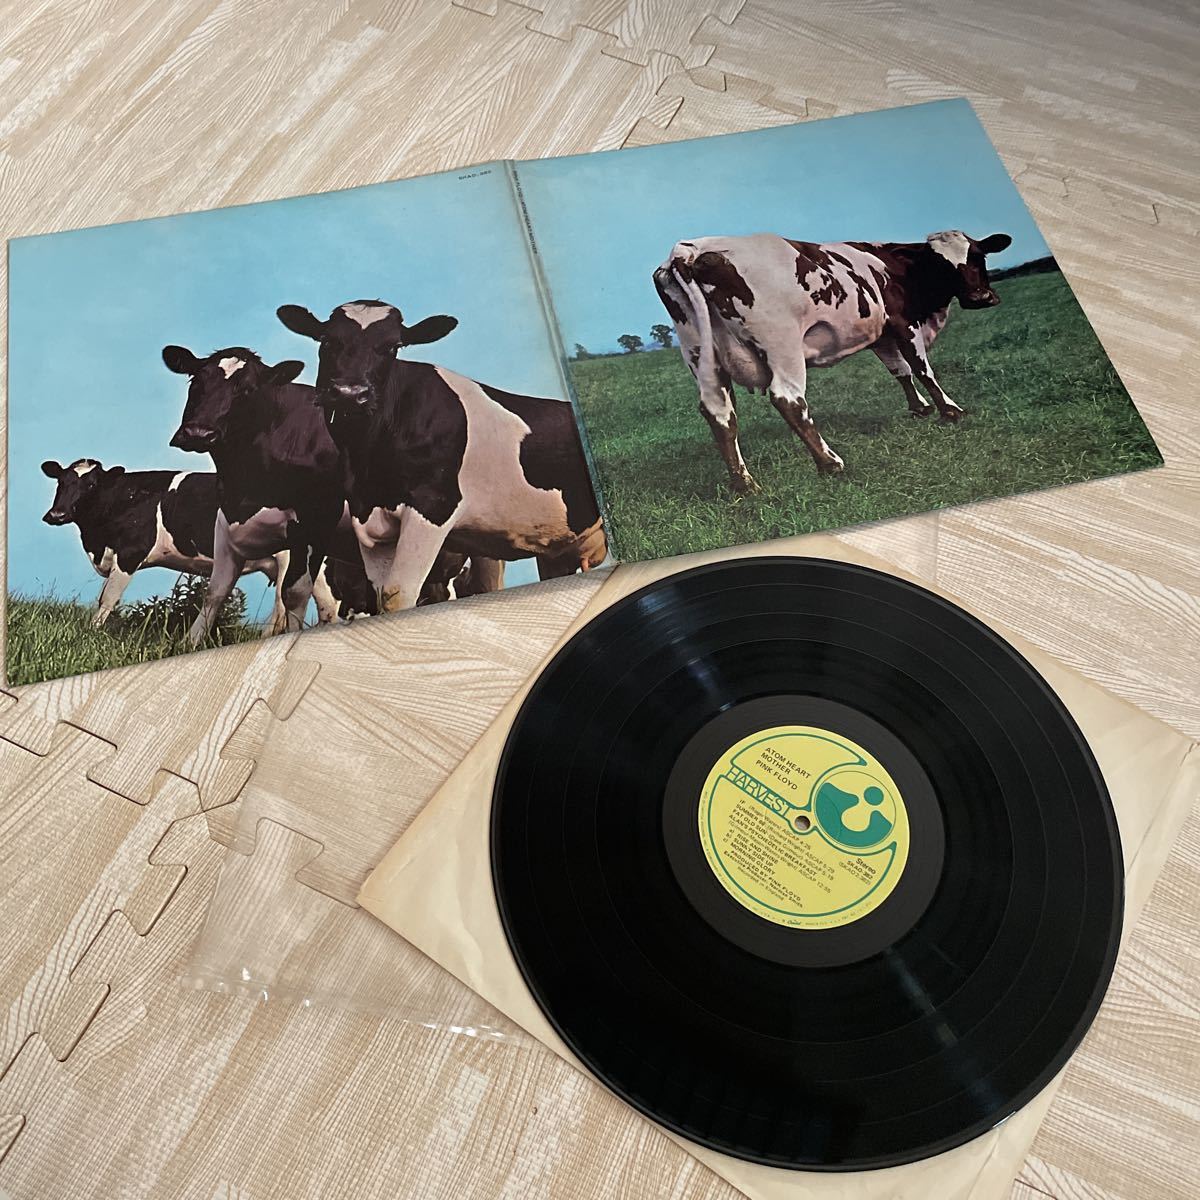 [US version ] pink * floyd Pink Floyd Atom Heart Mother Harvest SKAO-382 CAPITOL. character none jacket US record freebie attaching 